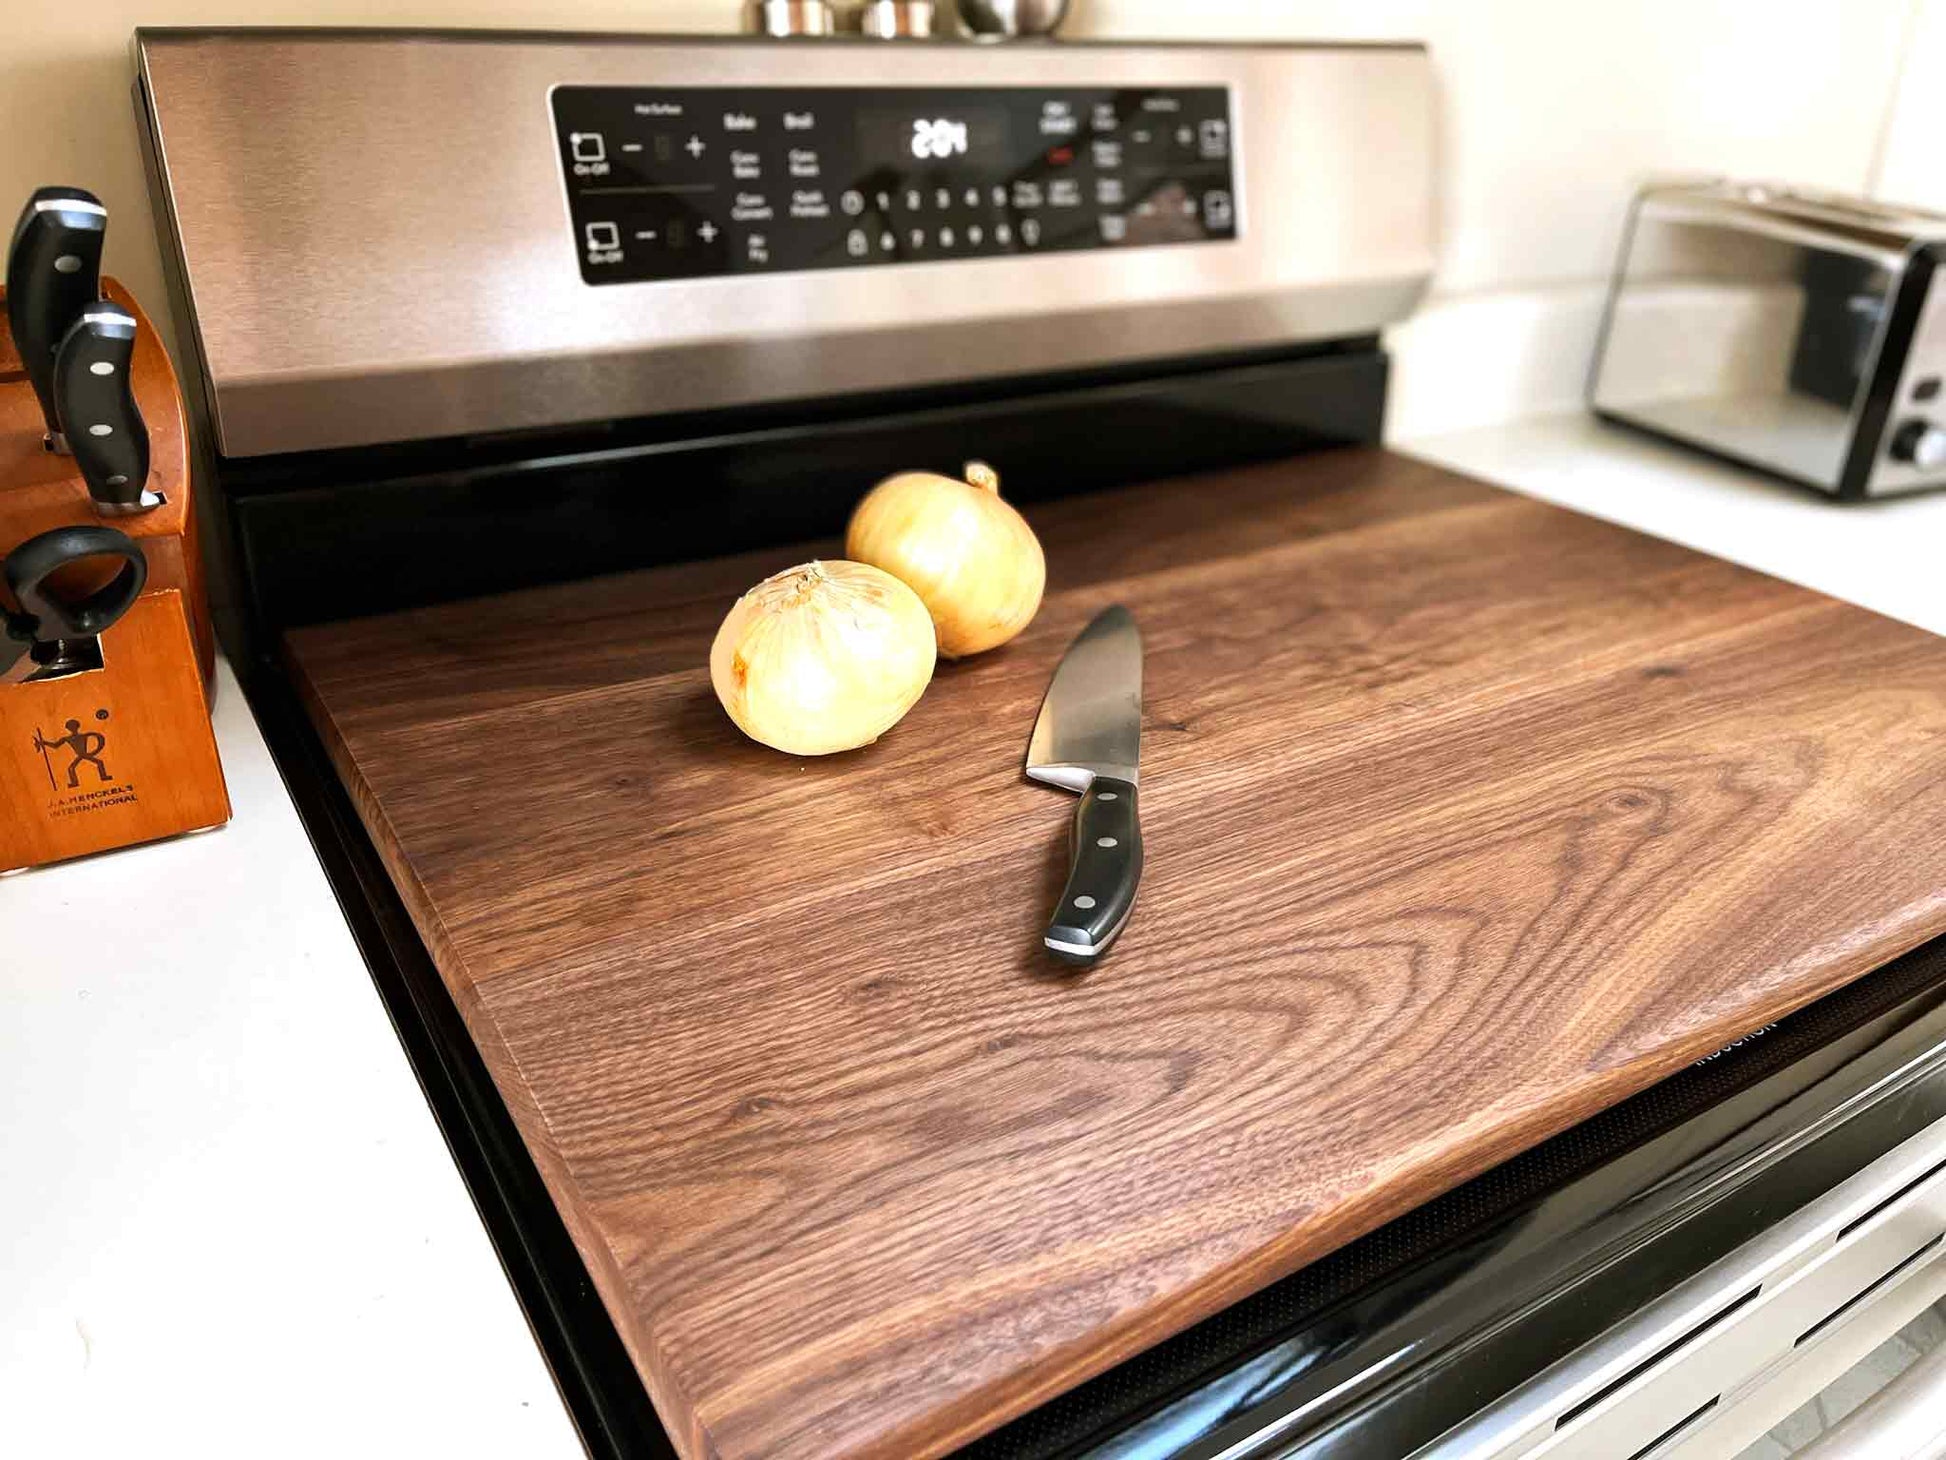 Noodle Board, Wooden Stove Cover